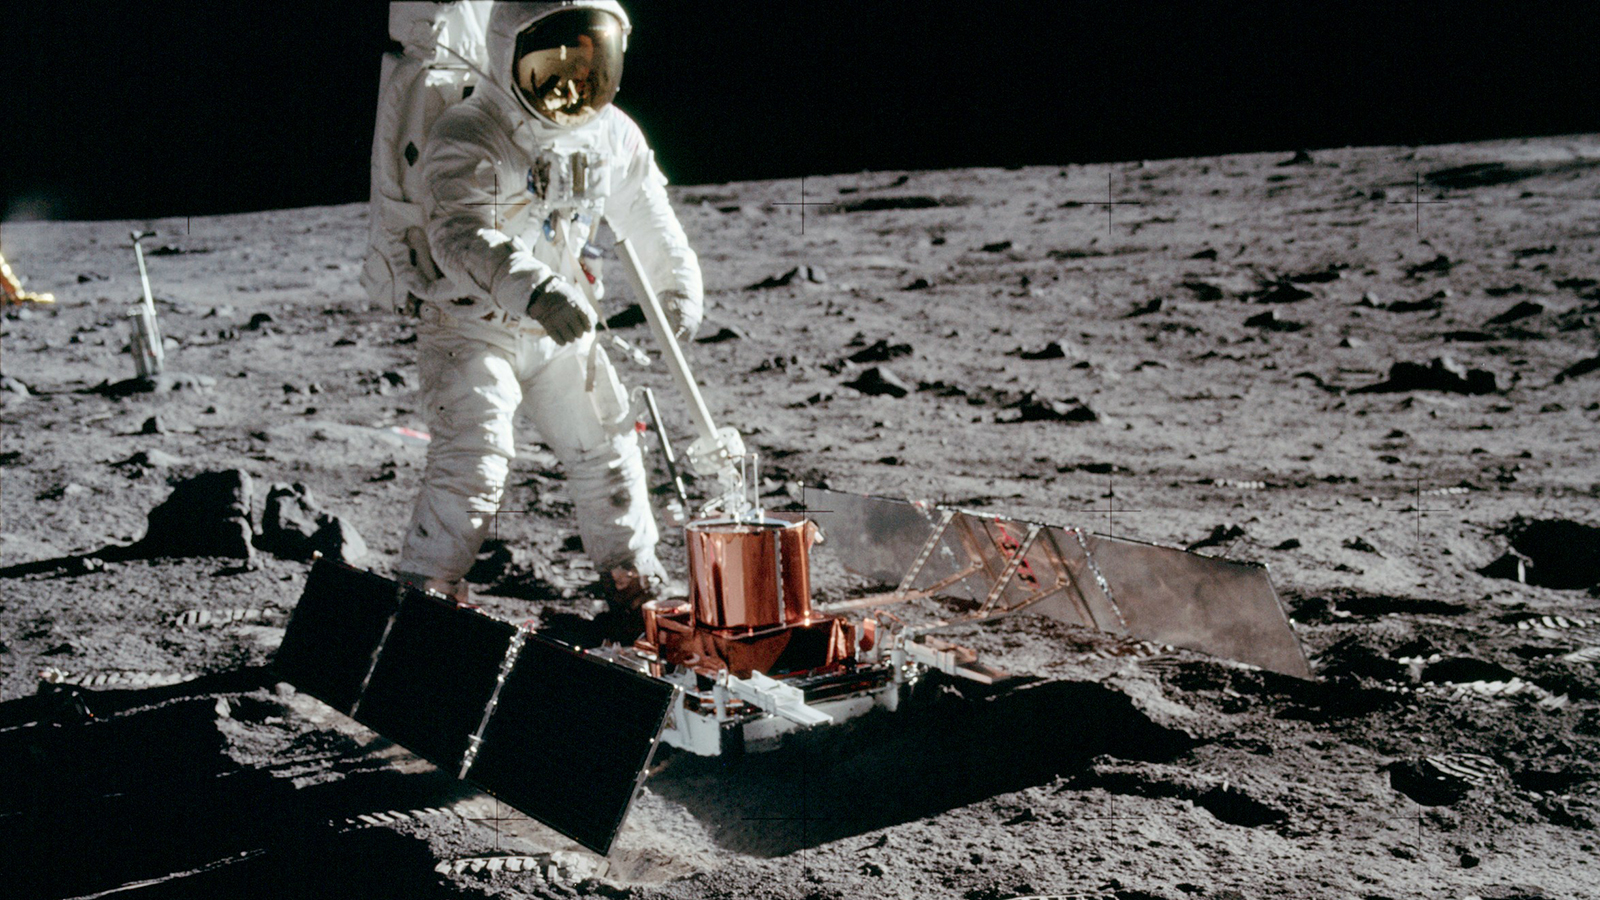 Color image of astronaut with scientific equipment on the moon.